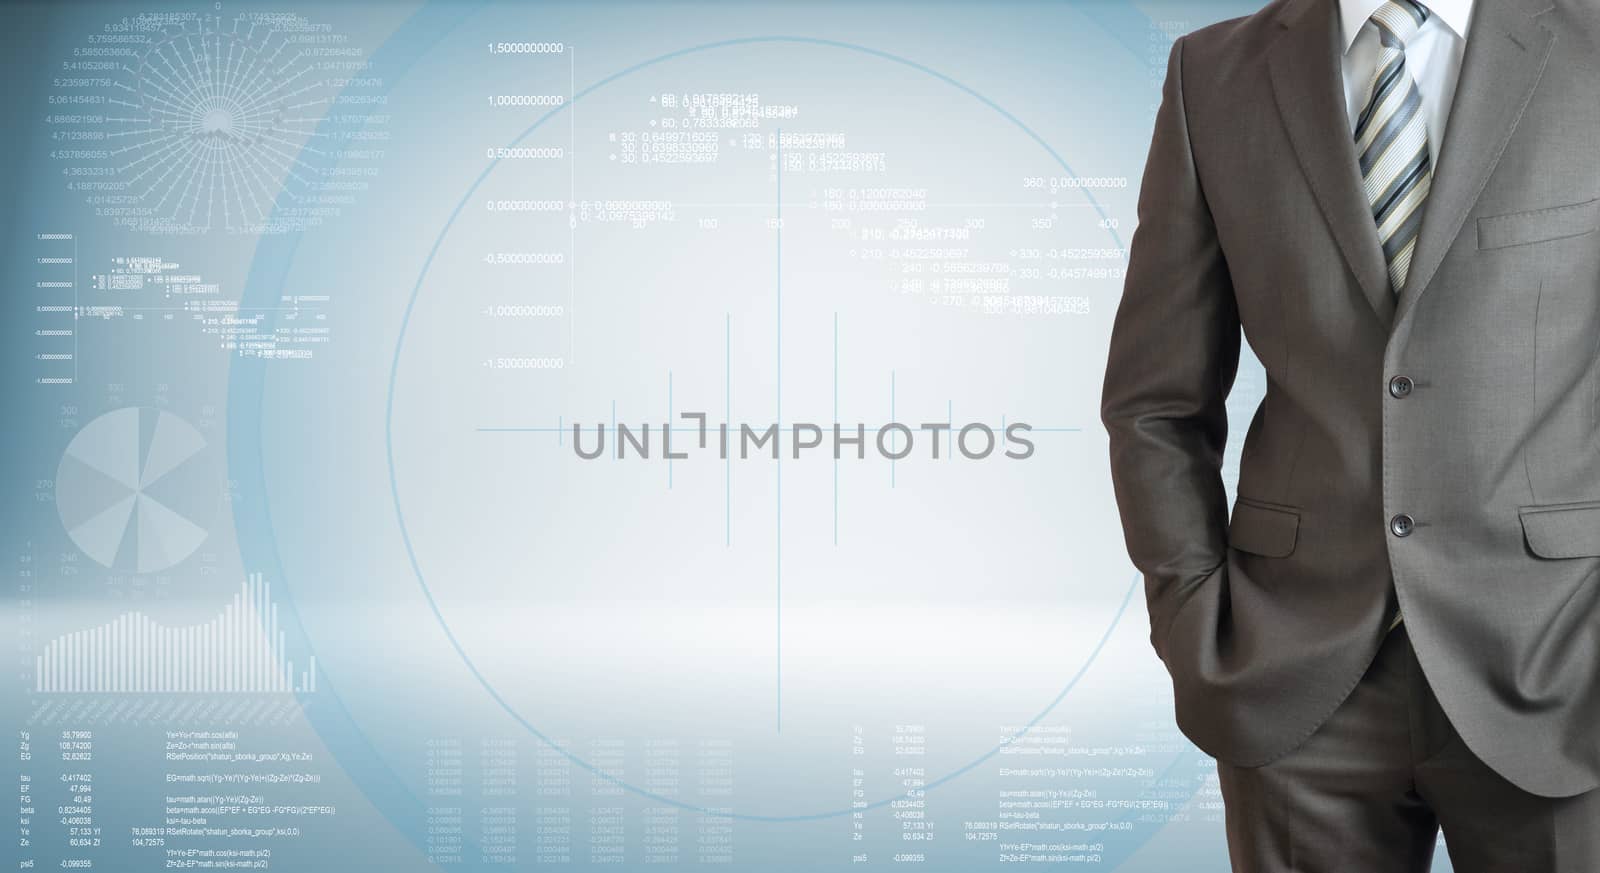 Businessman standing with hands in pockets. High-tech graphs at backdrop